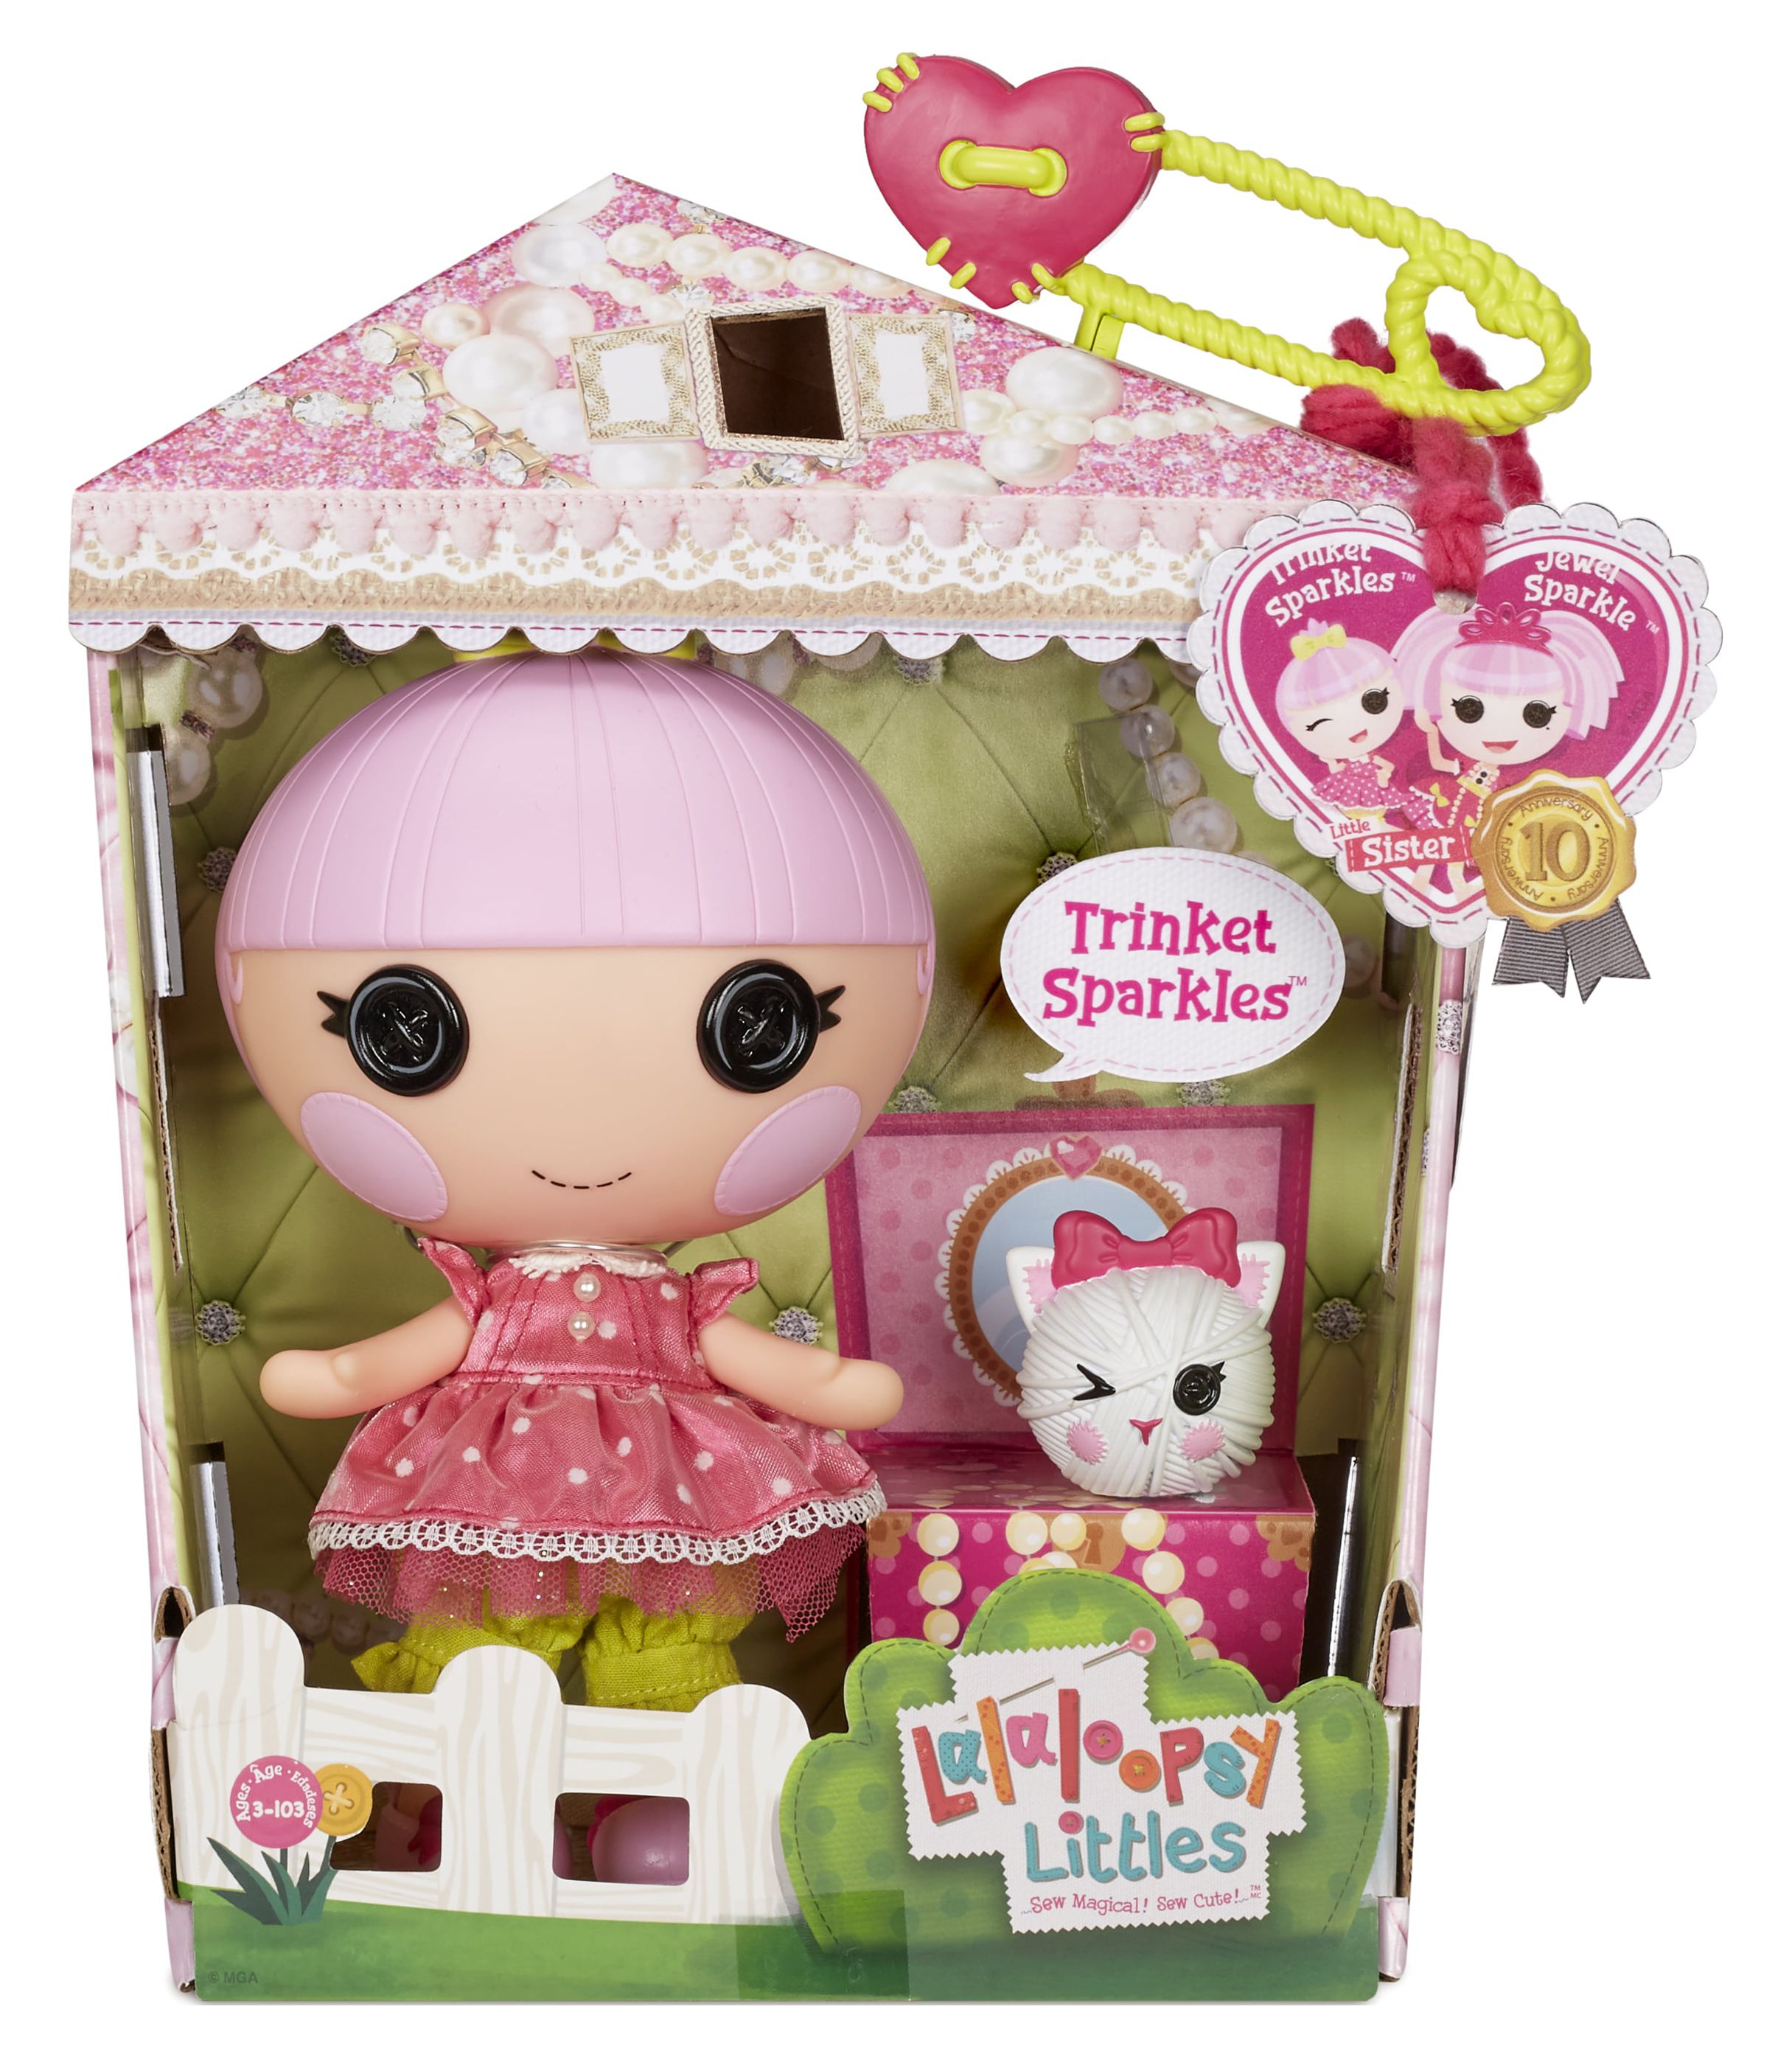 Lalaloopsy Littles Doll Trinket Sparkles and Pet Kitten Playset, 7" Princess Doll With Changeable Pink Outfit and Shoes in Reusable Play House Package, Toys for Girls Ages 3 4 5+ to 103 - image 5 of 5